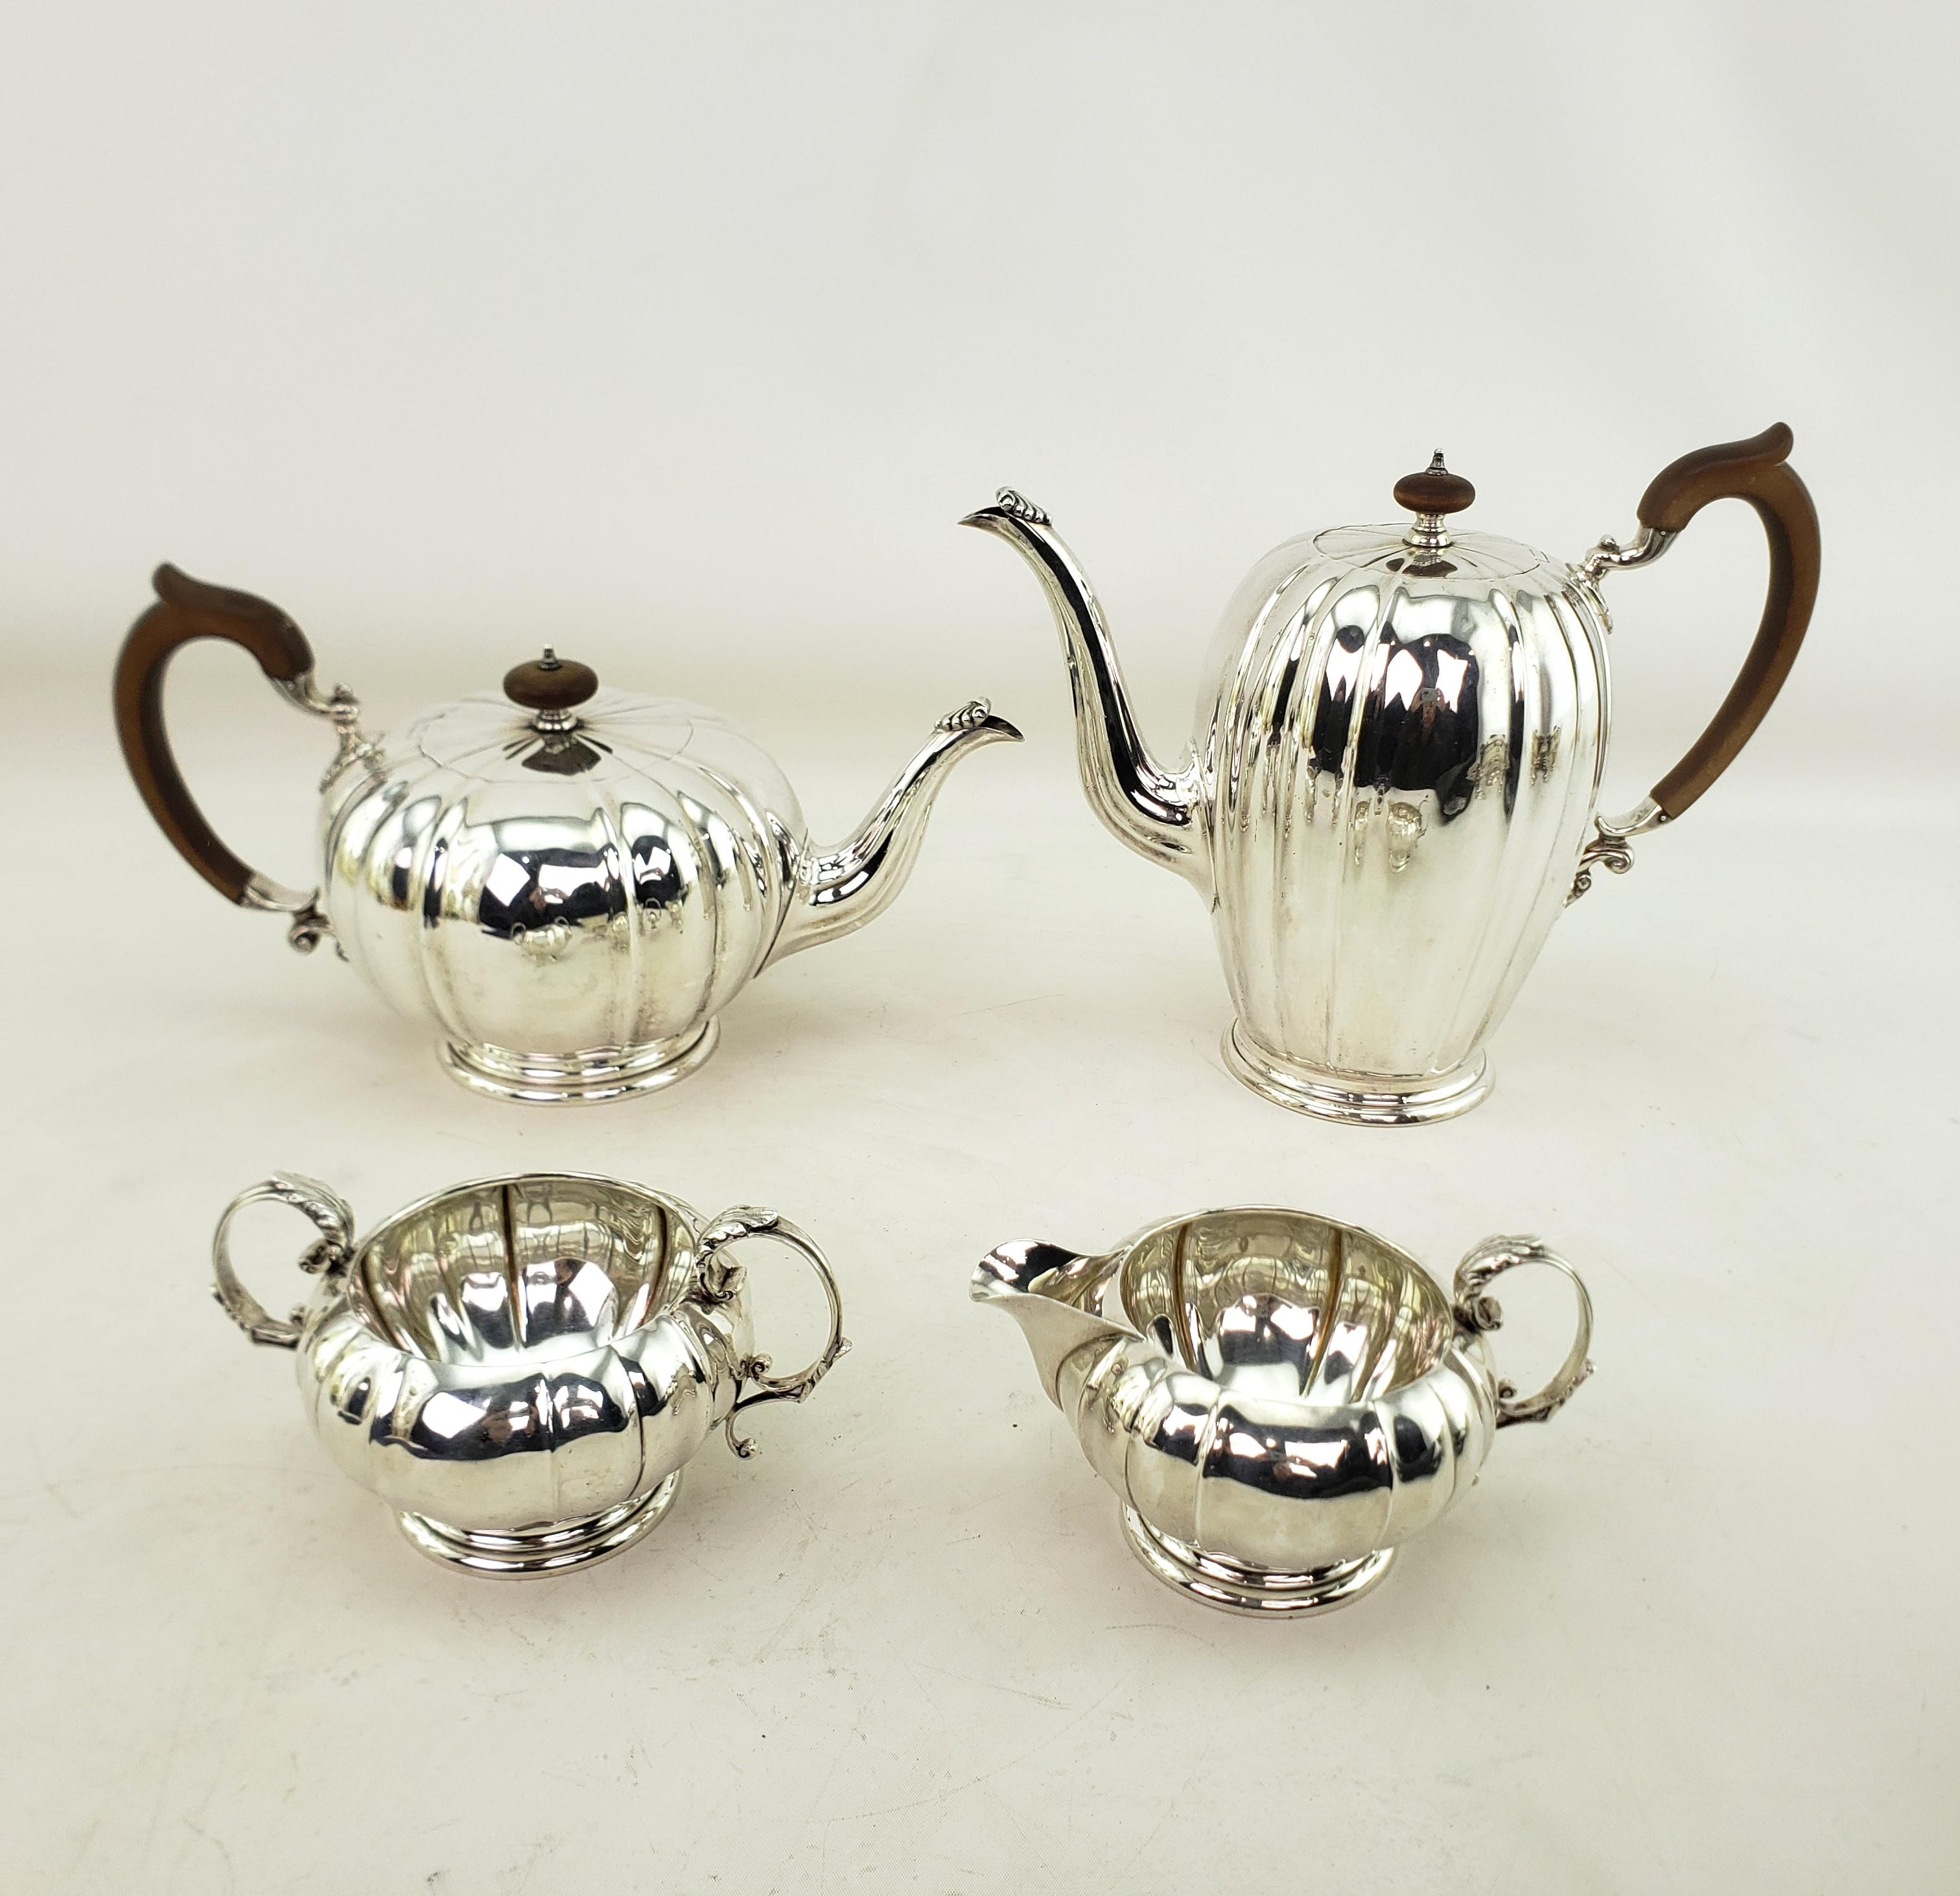 George II Antique Birks Sterling Silver Tea or Coffee Set with Creamer & Sugar Bowl For Sale